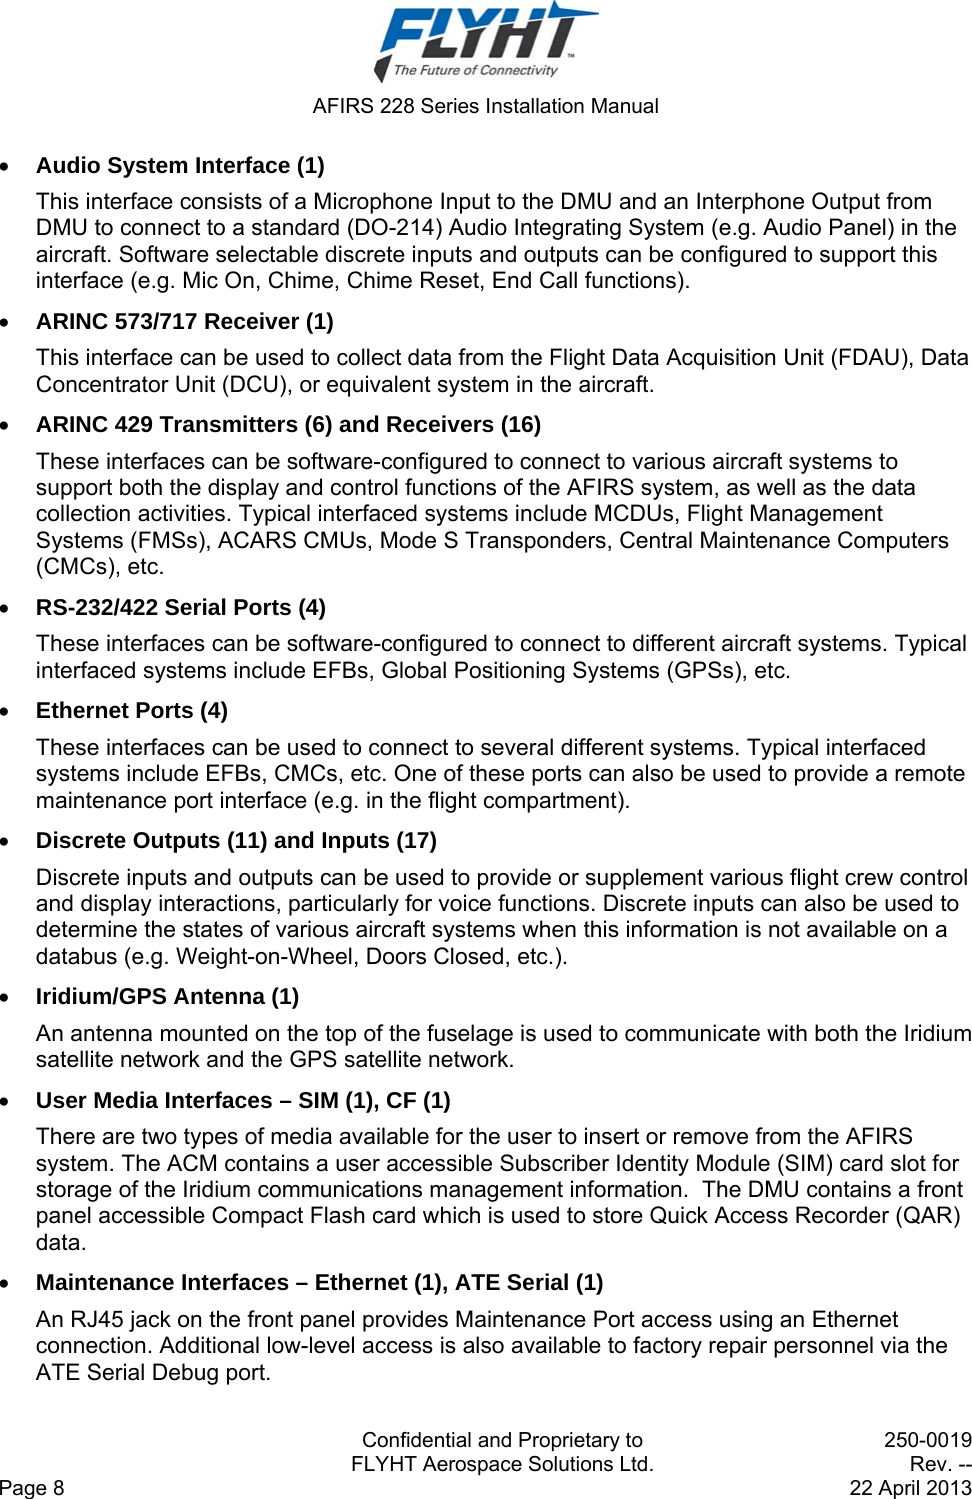  AFIRS 228 Series Installation Manual   Confidential and Proprietary to  250-0019   FLYHT Aerospace Solutions Ltd.  Rev. -- Page 8    22 April 2013  Audio System Interface (1) This interface consists of a Microphone Input to the DMU and an Interphone Output from DMU to connect to a standard (DO-214) Audio Integrating System (e.g. Audio Panel) in the aircraft. Software selectable discrete inputs and outputs can be configured to support this interface (e.g. Mic On, Chime, Chime Reset, End Call functions).  ARINC 573/717 Receiver (1) This interface can be used to collect data from the Flight Data Acquisition Unit (FDAU), Data Concentrator Unit (DCU), or equivalent system in the aircraft.  ARINC 429 Transmitters (6) and Receivers (16) These interfaces can be software-configured to connect to various aircraft systems to support both the display and control functions of the AFIRS system, as well as the data collection activities. Typical interfaced systems include MCDUs, Flight Management Systems (FMSs), ACARS CMUs, Mode S Transponders, Central Maintenance Computers (CMCs), etc.  RS-232/422 Serial Ports (4) These interfaces can be software-configured to connect to different aircraft systems. Typical interfaced systems include EFBs, Global Positioning Systems (GPSs), etc.  Ethernet Ports (4) These interfaces can be used to connect to several different systems. Typical interfaced systems include EFBs, CMCs, etc. One of these ports can also be used to provide a remote maintenance port interface (e.g. in the flight compartment).  Discrete Outputs (11) and Inputs (17) Discrete inputs and outputs can be used to provide or supplement various flight crew control and display interactions, particularly for voice functions. Discrete inputs can also be used to determine the states of various aircraft systems when this information is not available on a databus (e.g. Weight-on-Wheel, Doors Closed, etc.).  Iridium/GPS Antenna (1) An antenna mounted on the top of the fuselage is used to communicate with both the Iridium satellite network and the GPS satellite network.  User Media Interfaces – SIM (1), CF (1) There are two types of media available for the user to insert or remove from the AFIRS system. The ACM contains a user accessible Subscriber Identity Module (SIM) card slot for storage of the Iridium communications management information.  The DMU contains a front panel accessible Compact Flash card which is used to store Quick Access Recorder (QAR) data.  Maintenance Interfaces – Ethernet (1), ATE Serial (1) An RJ45 jack on the front panel provides Maintenance Port access using an Ethernet connection. Additional low-level access is also available to factory repair personnel via the ATE Serial Debug port. 